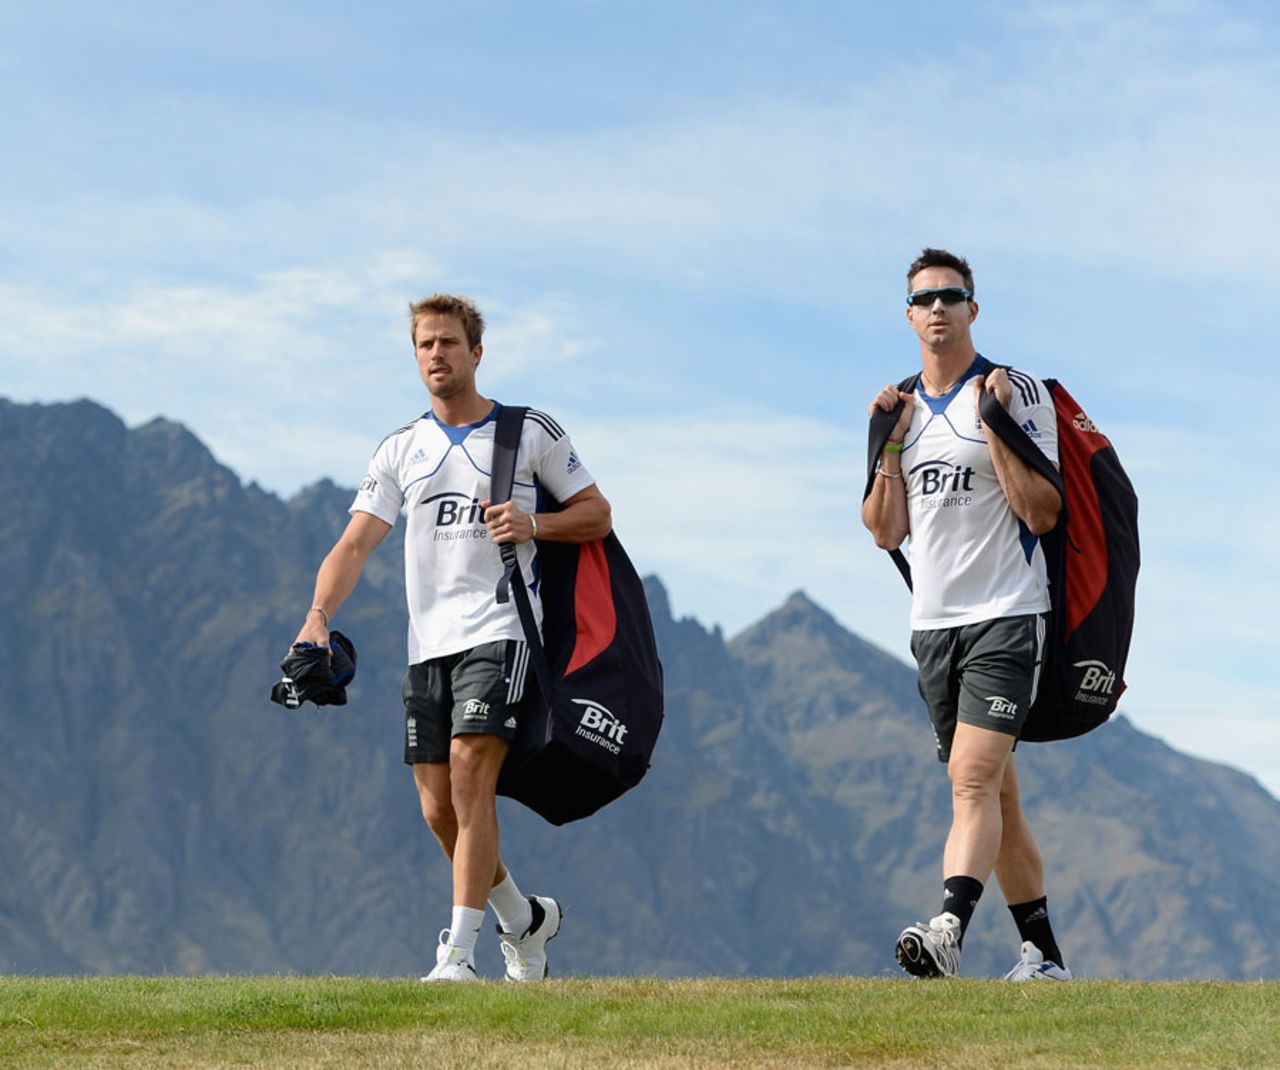 Nick Compton and Kevin Pietersen at a practice session in Queenstown, New Zealand, New Zealand XI v England XI, Tour match, February 27-March 2, 2013